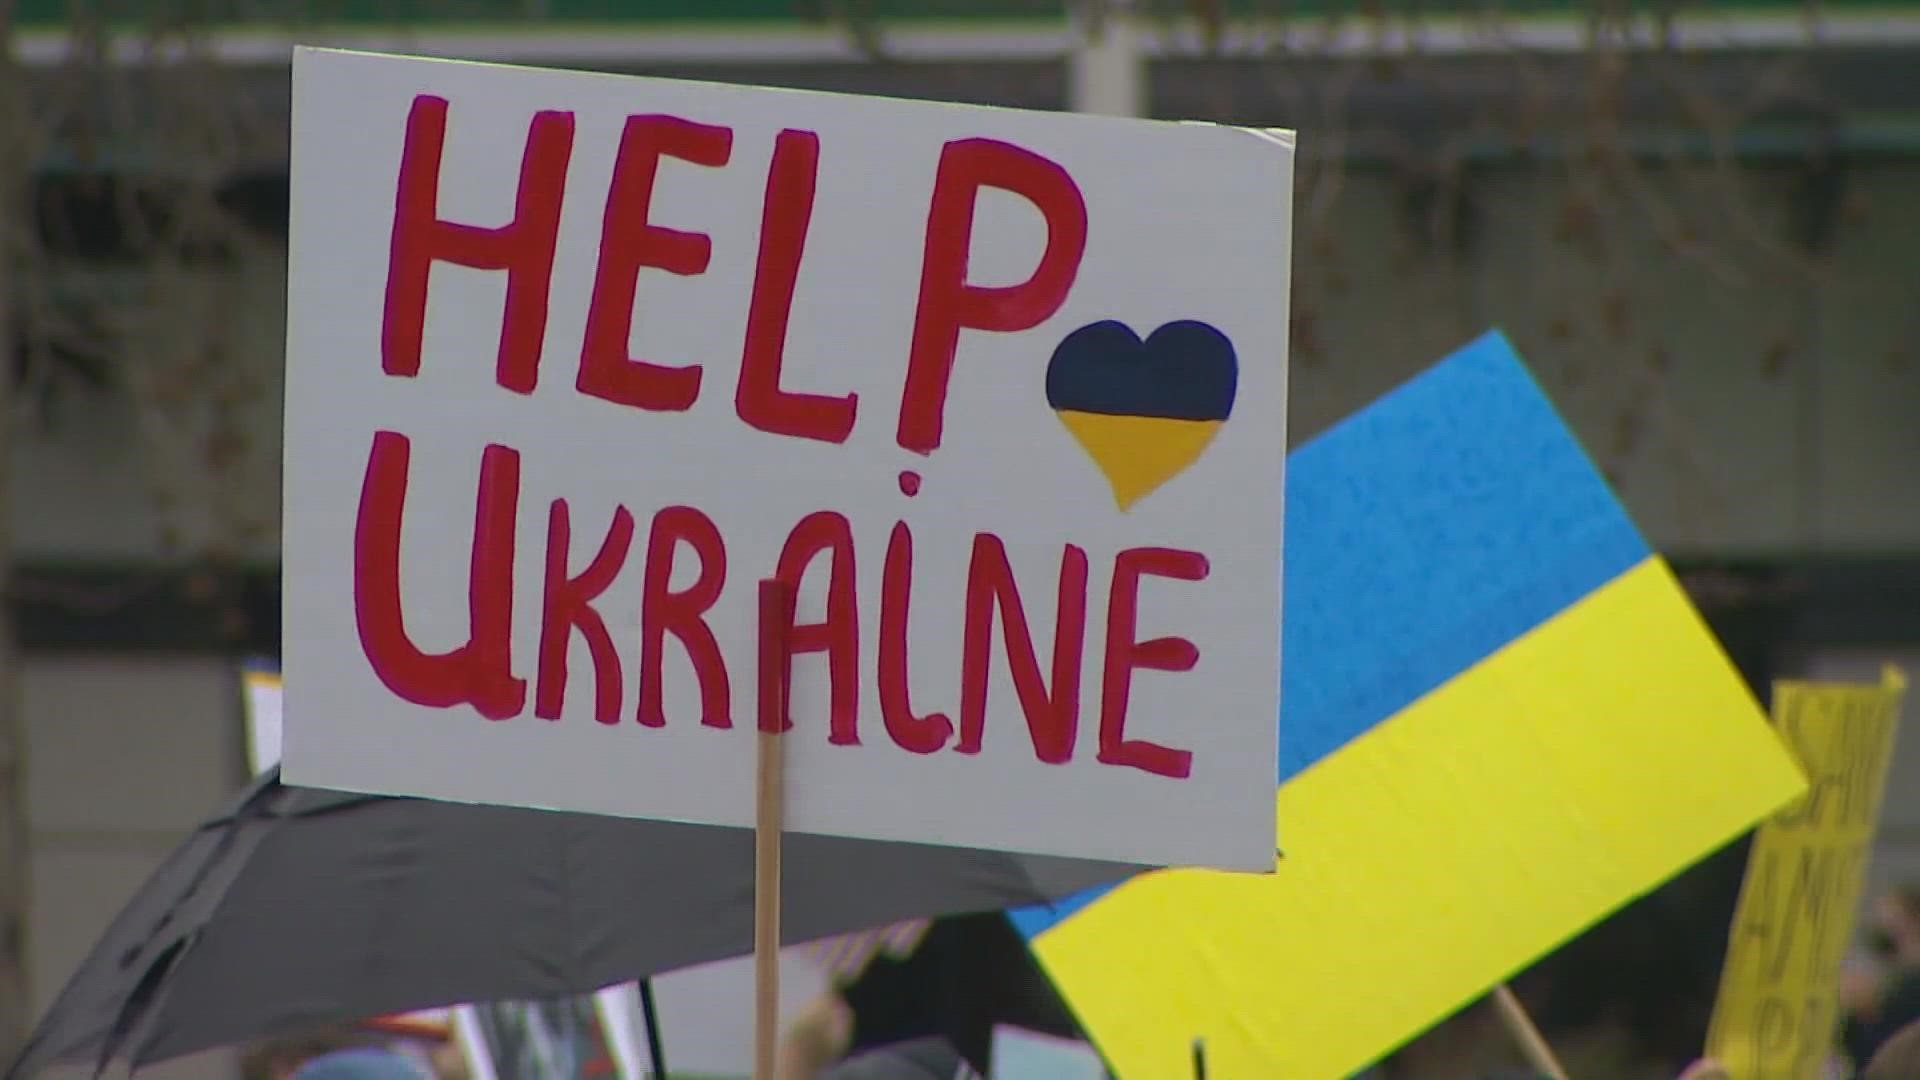 The Ukrainian Association of Washington State is collecting medications and medical supplies. Other organizations are collecting monetary donations.